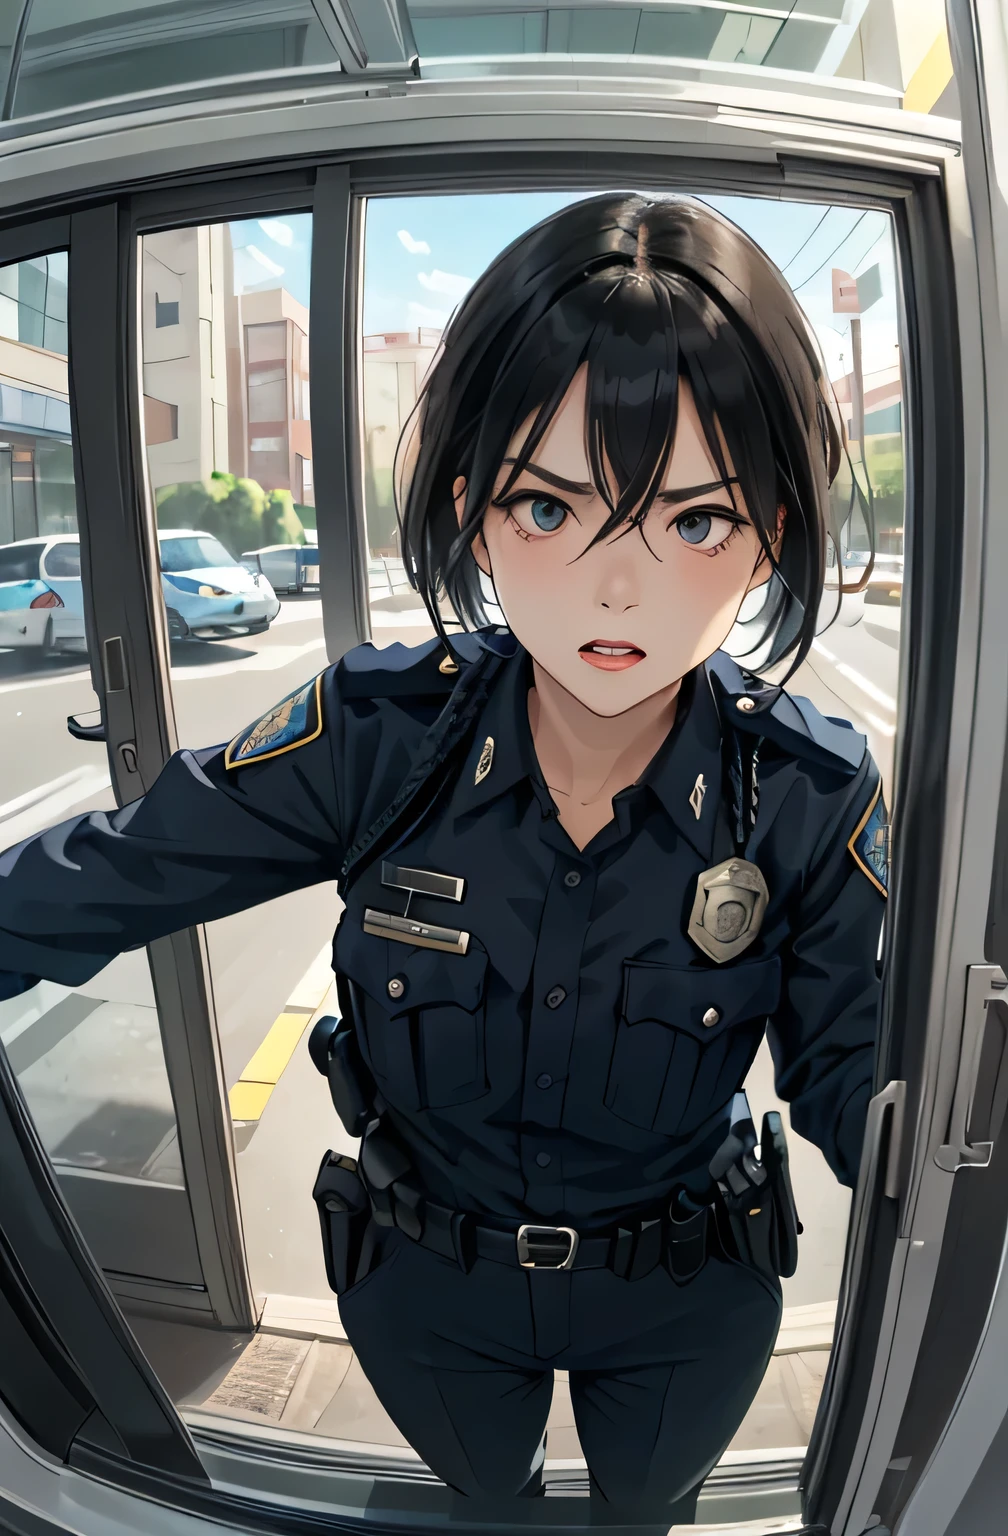 masterpiece, best quality, 1lady solo, (((standing outside window))) (peering into viewers), (female police) (traffic officer), mature female, /(light black hair/) bangs, cool expression, sharp eyes, (teeth:0.8), (masterpiece best quality:1.2) delicate illustration ultra-detailed, angry, BREAK (ordinary public road) outdoors, ((perspective from inside car)), car window, noon, car, detailed background ((looking disgusted)), looking at viewer, traffic stop, pulled over